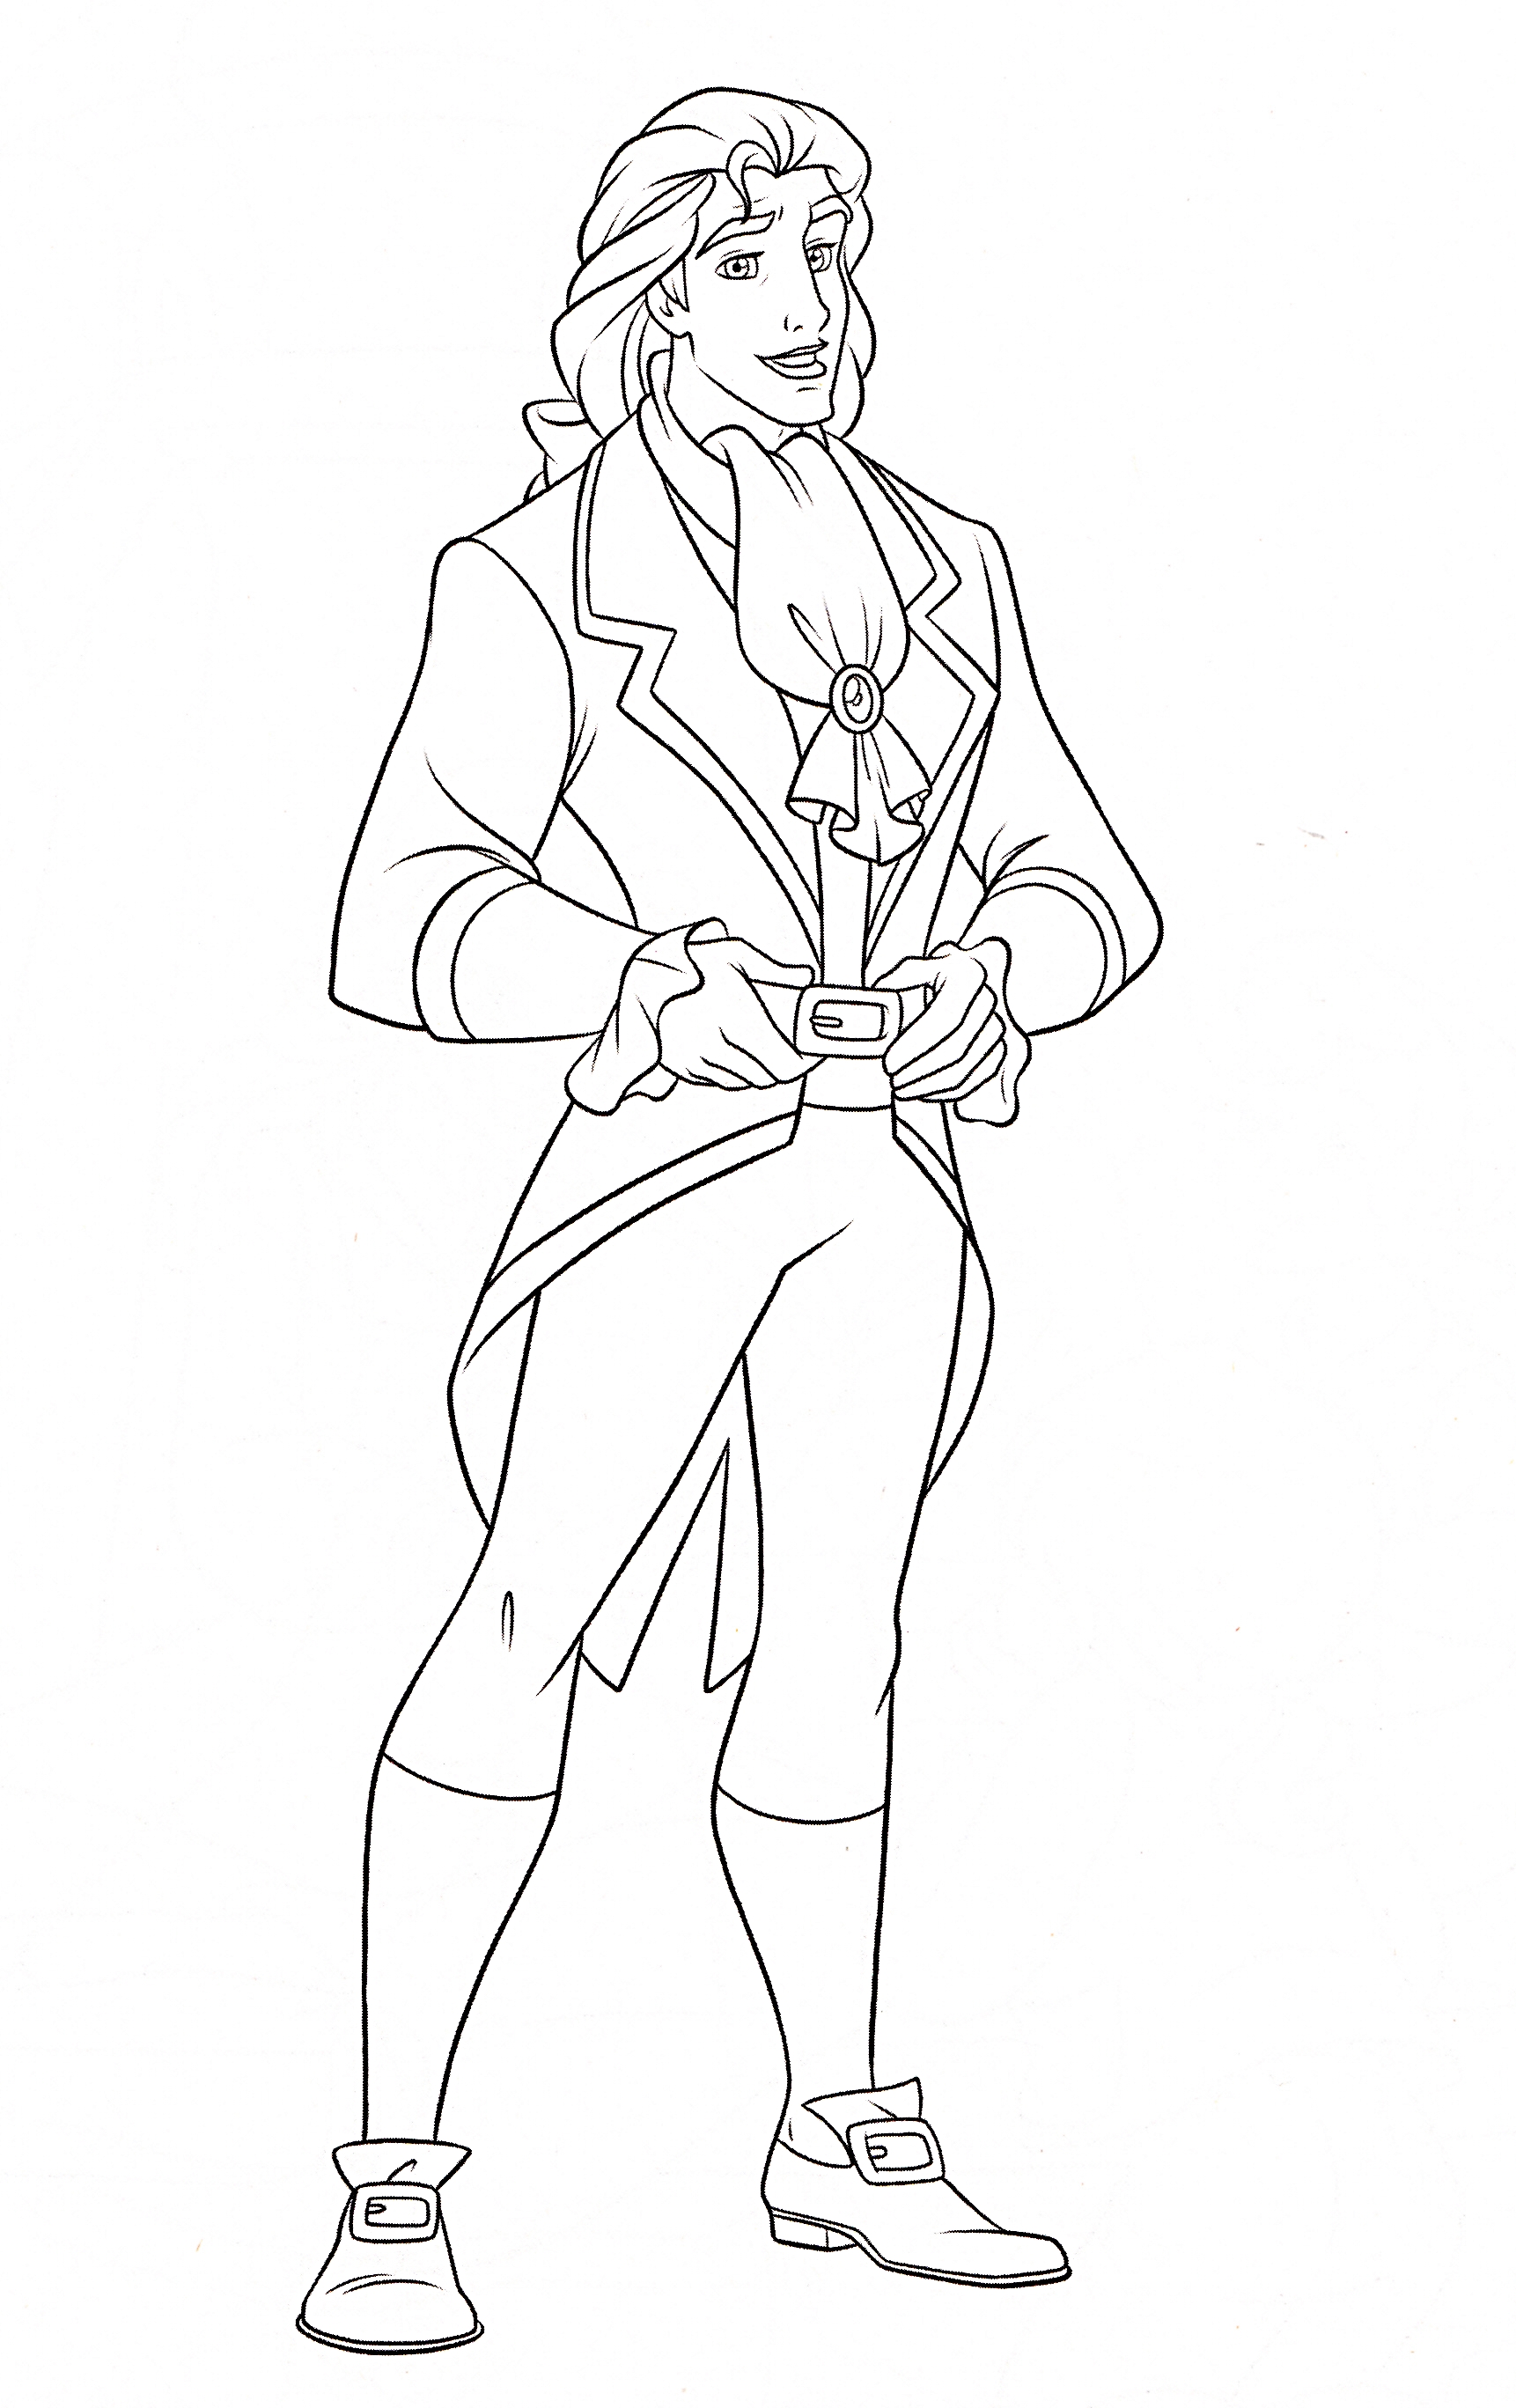 Prince coloring pages to download and print for free